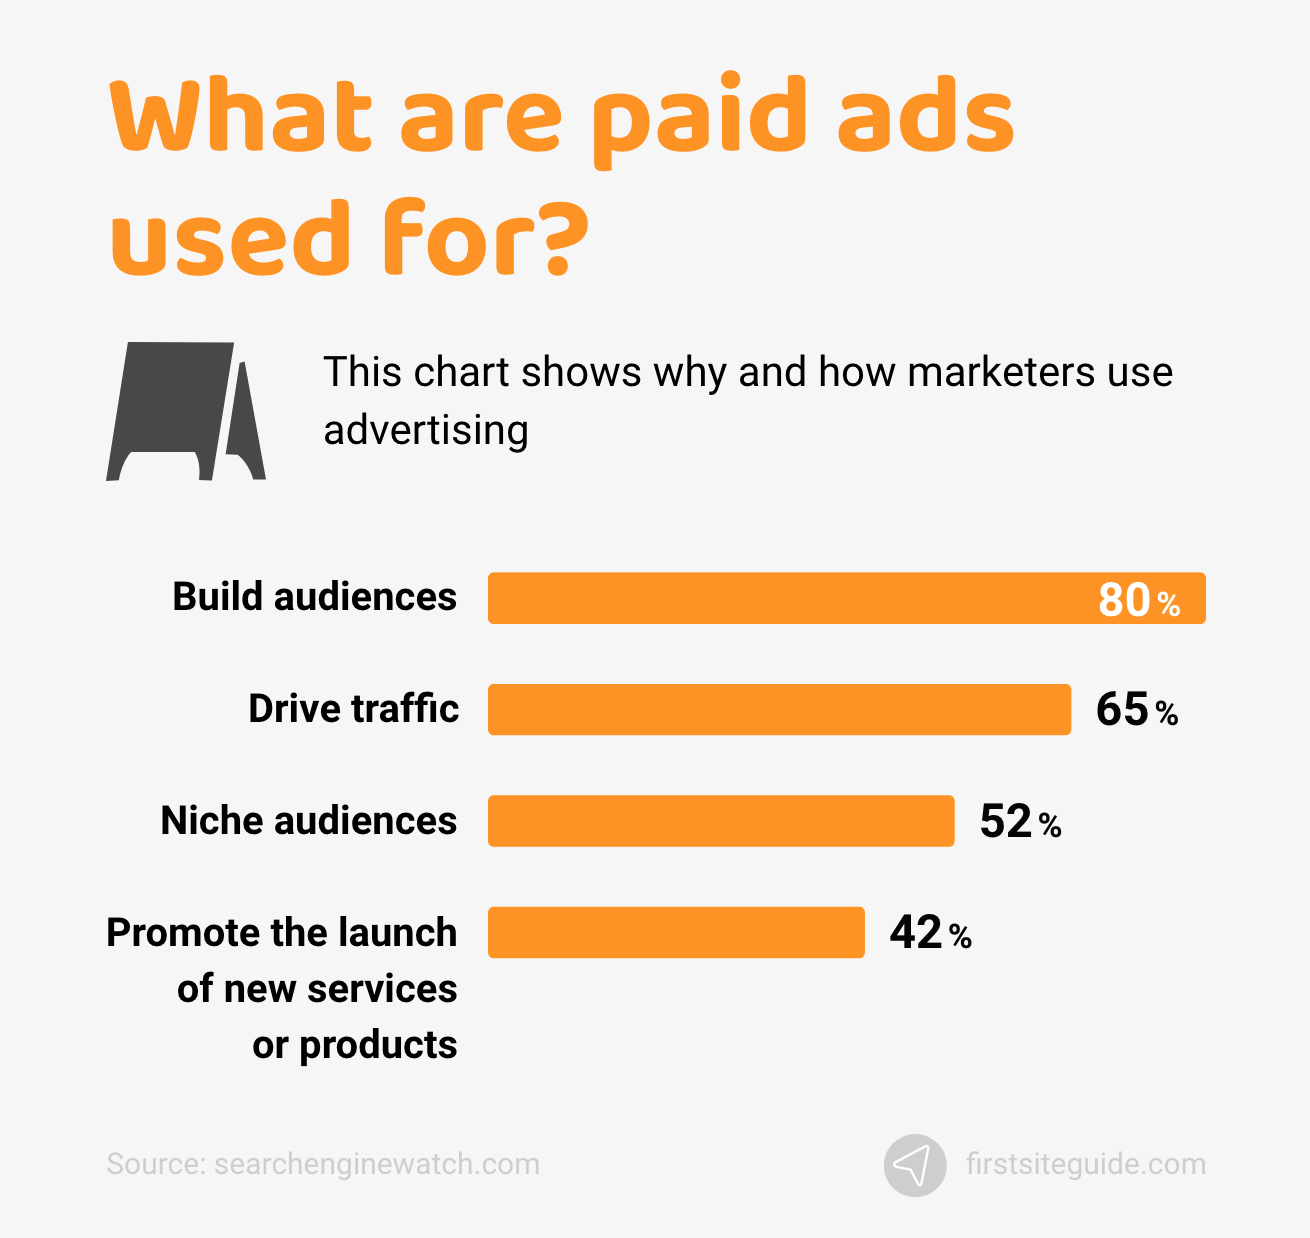 What are paid ads used for